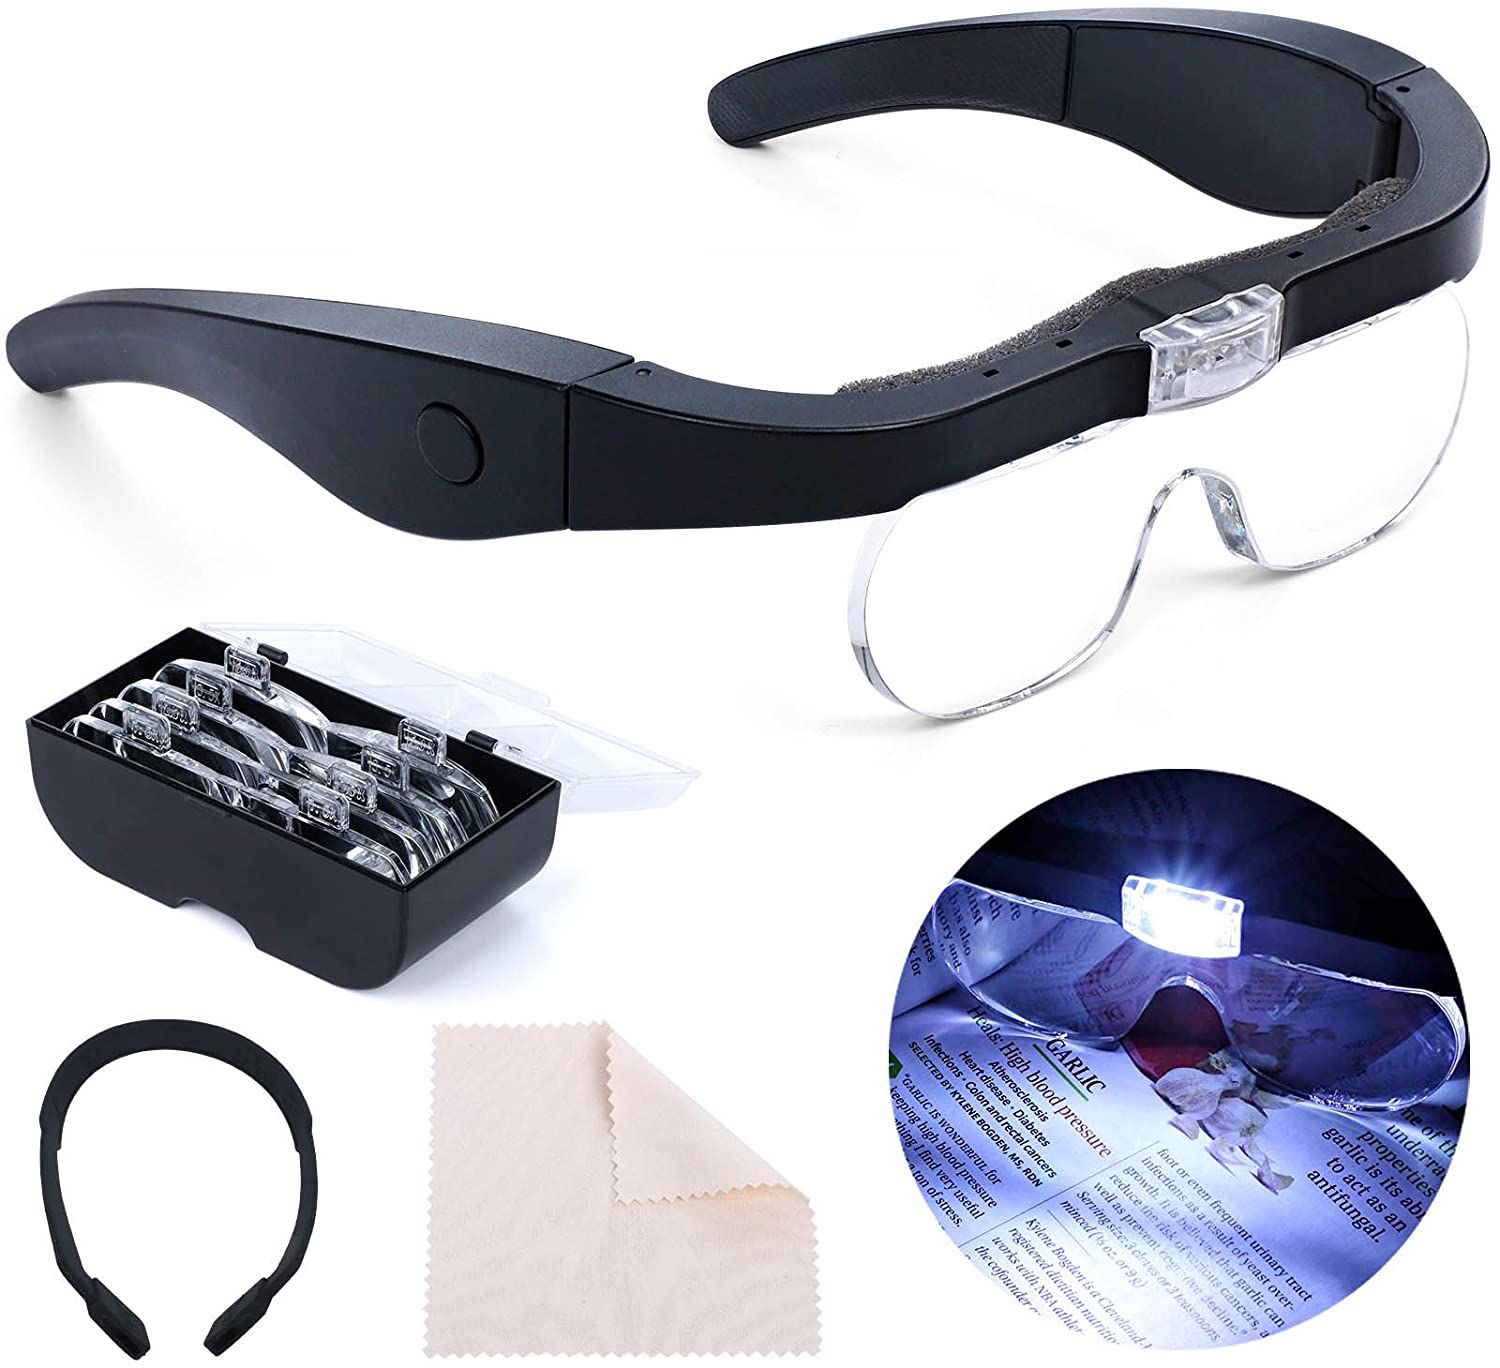 Headband Magnifier Rechargeable Magnifying Glass with LED Light Hands Free